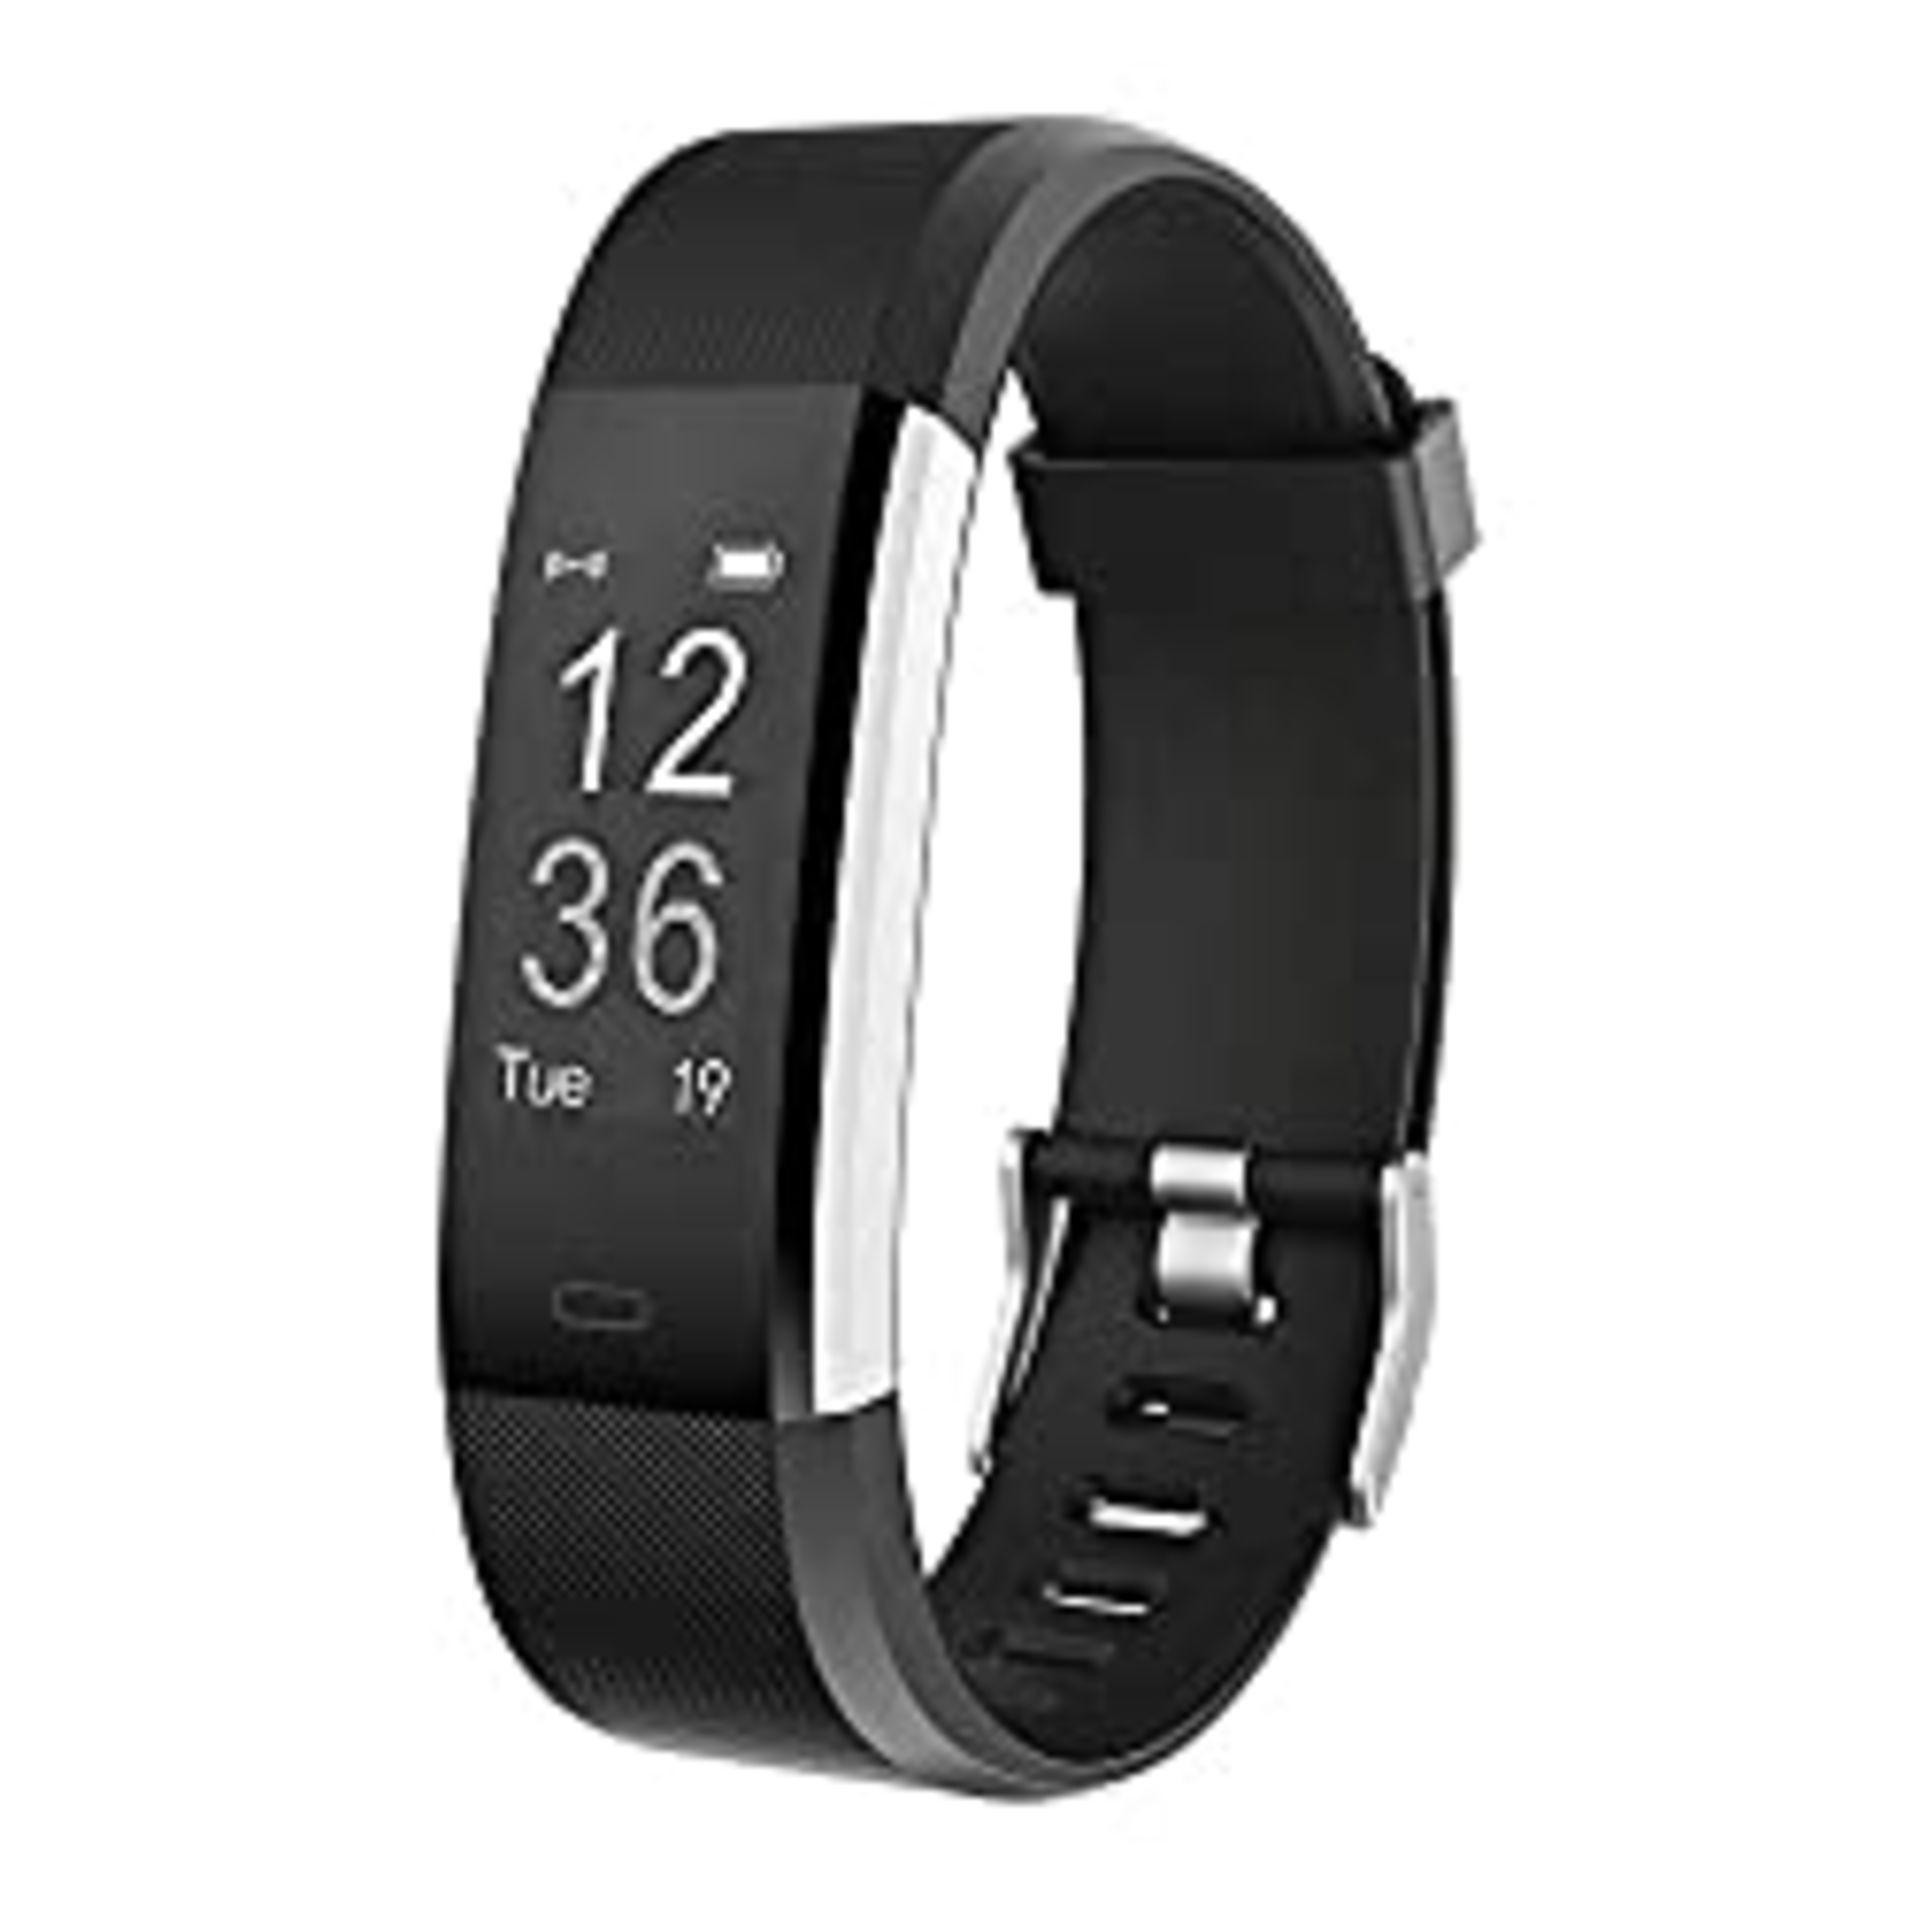 RRP £27.98 Delvfire Pulse Fitness Tracker with Heart Rate Monitor